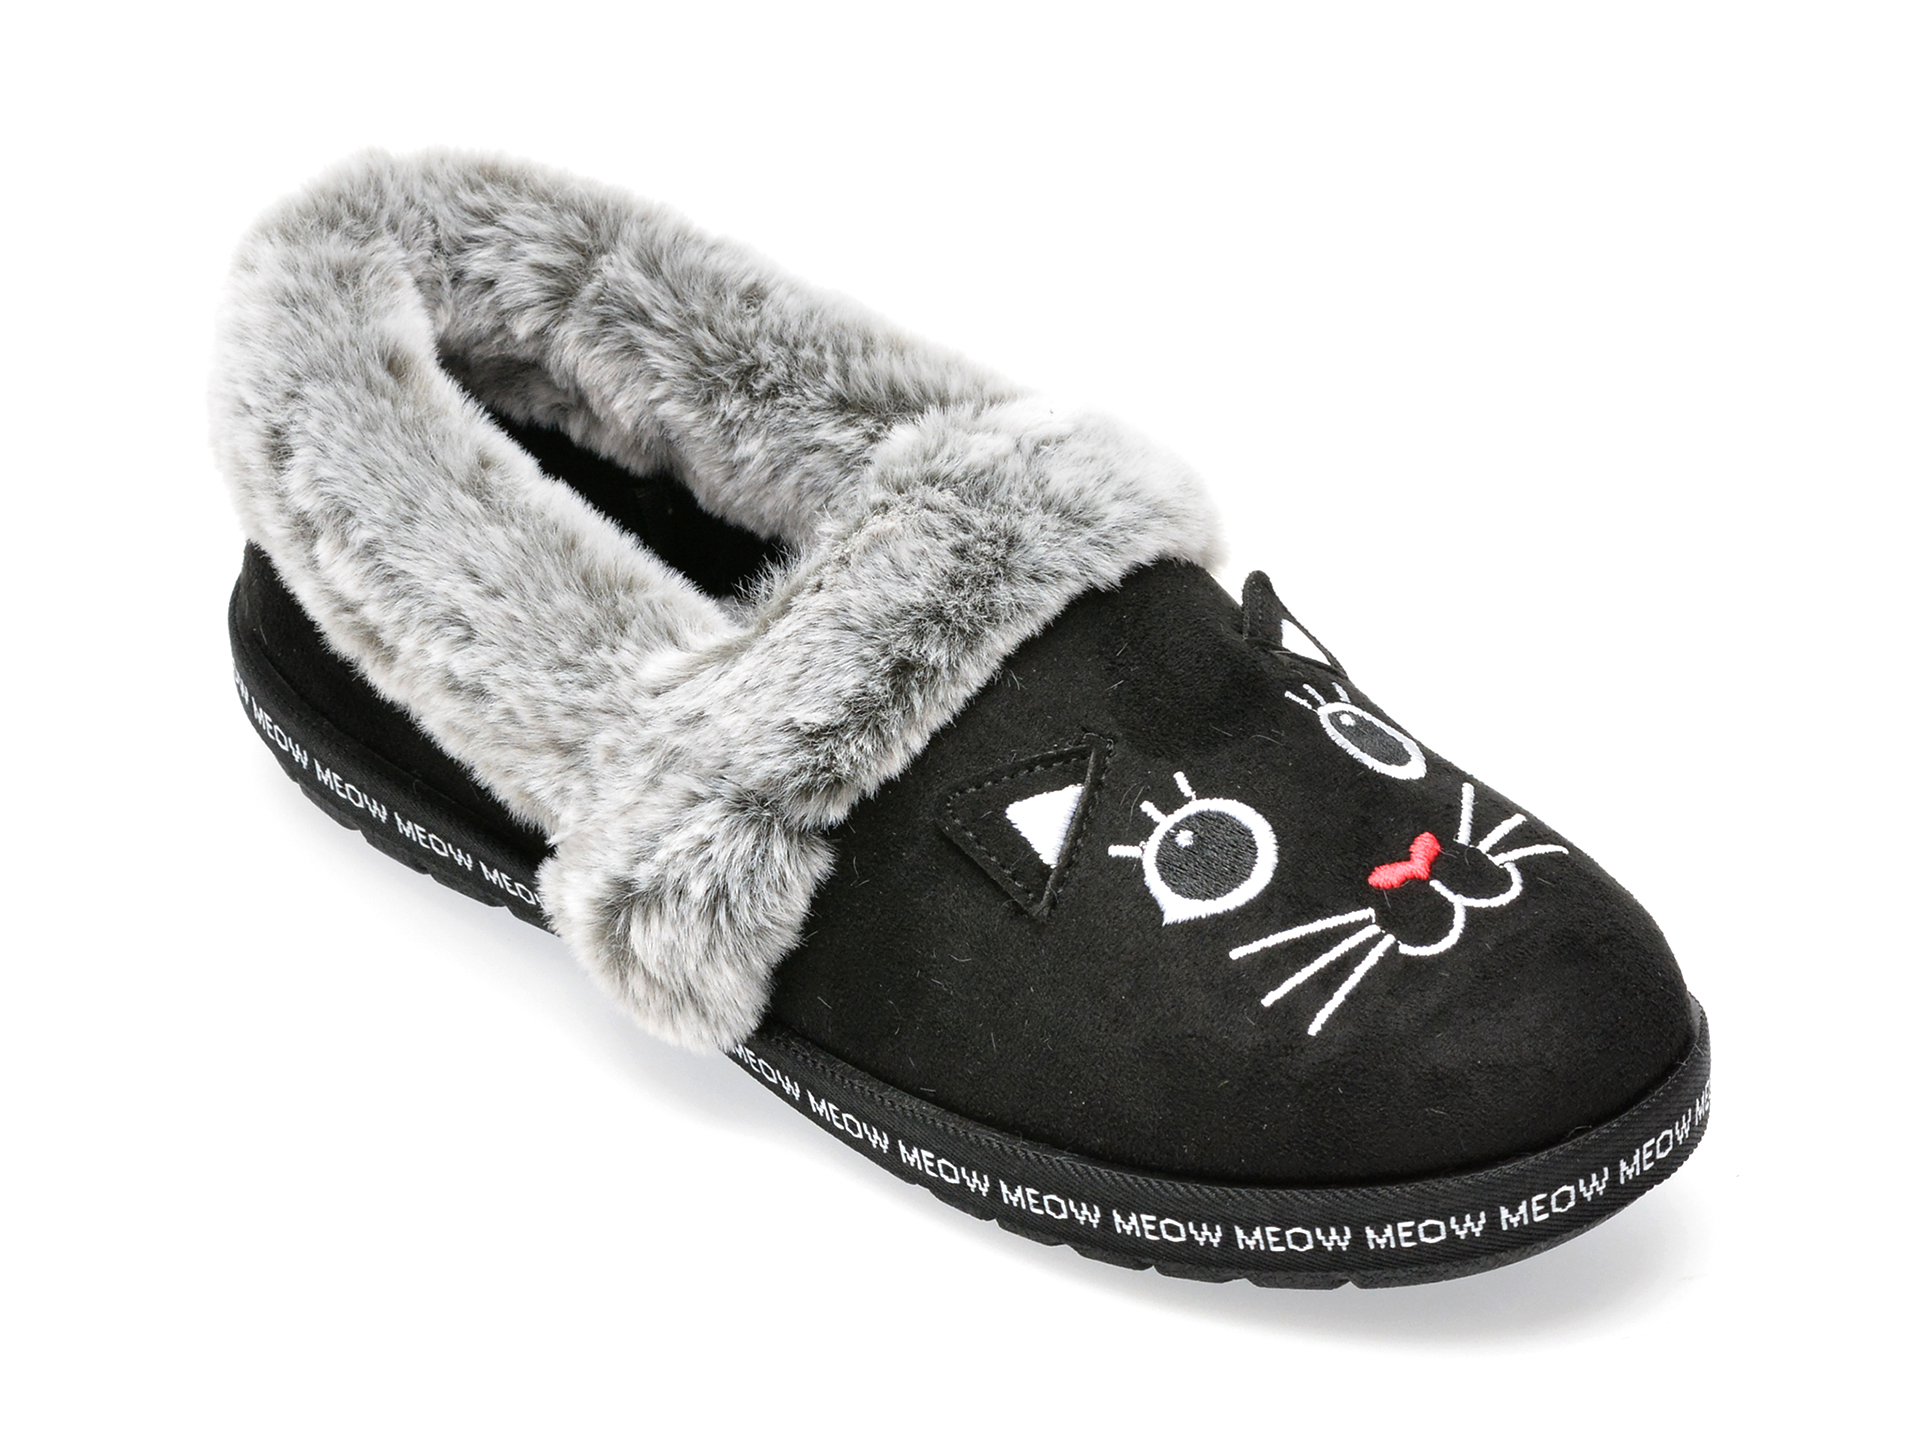 Papuci SKECHERS negri, BOBS TOO COZY, din material textil